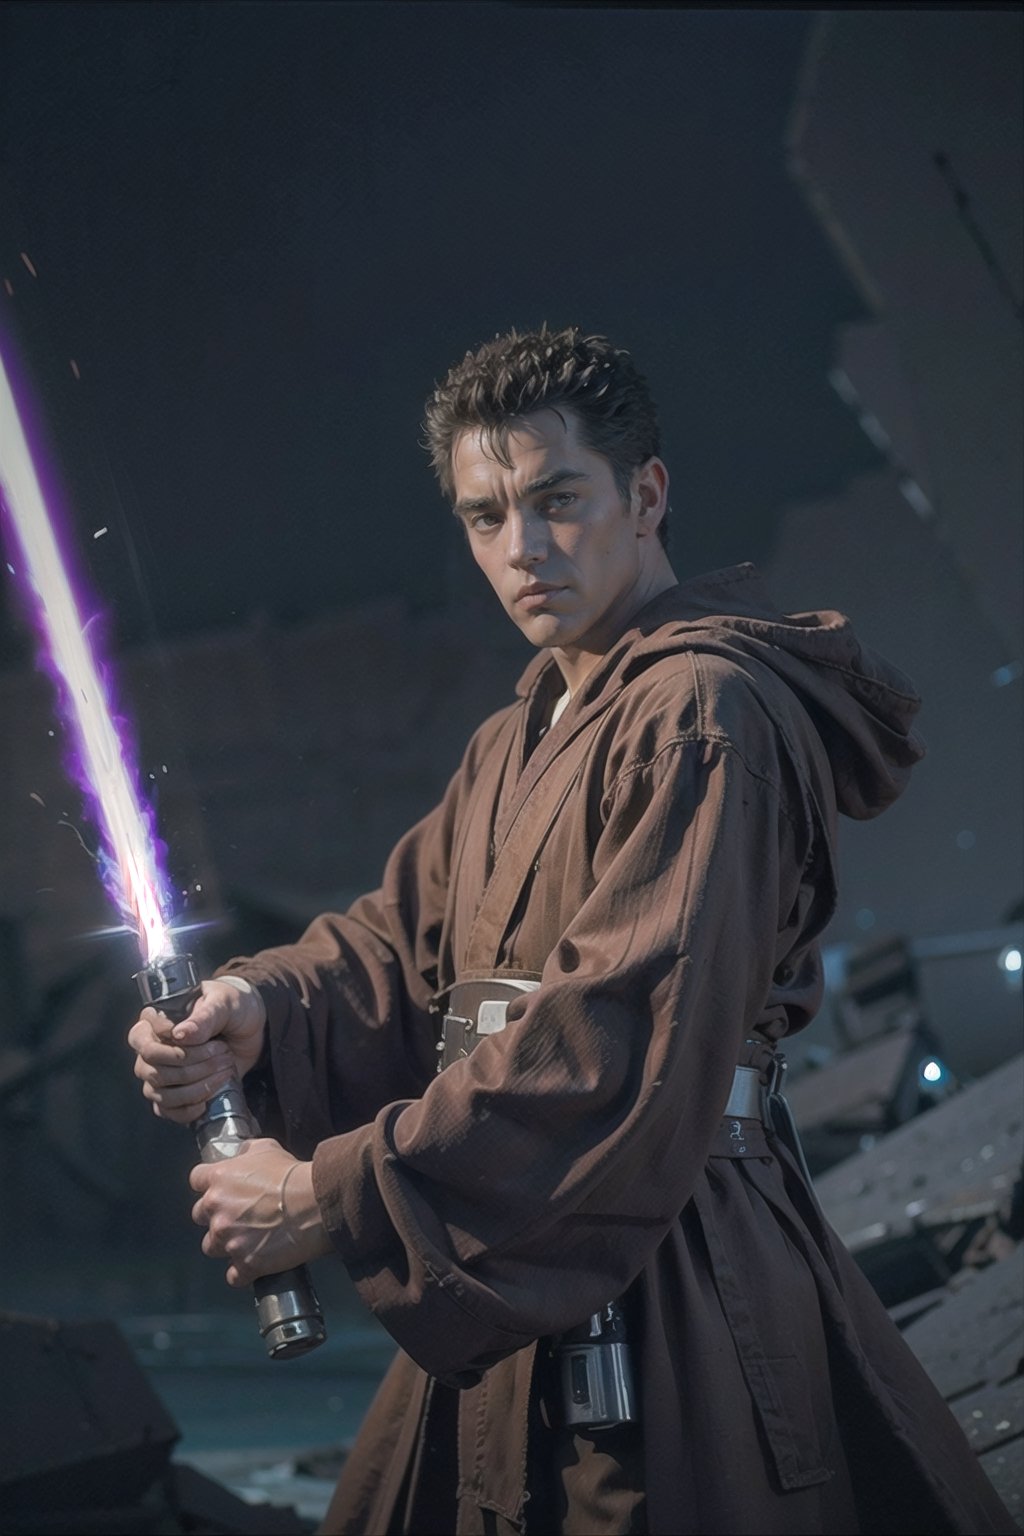 1 man, image of a mature man who looks like "Guts" from Berserk in Jedi robes, holding a purple lightsaber in his right hand, dynamic pose, ready for battle, mature, 35 years old, short hair, white streak in his hair, correctly wielding a lightsaber, light_saber, purple lightsaber, black dress, cloth pieces, on a planet of ice